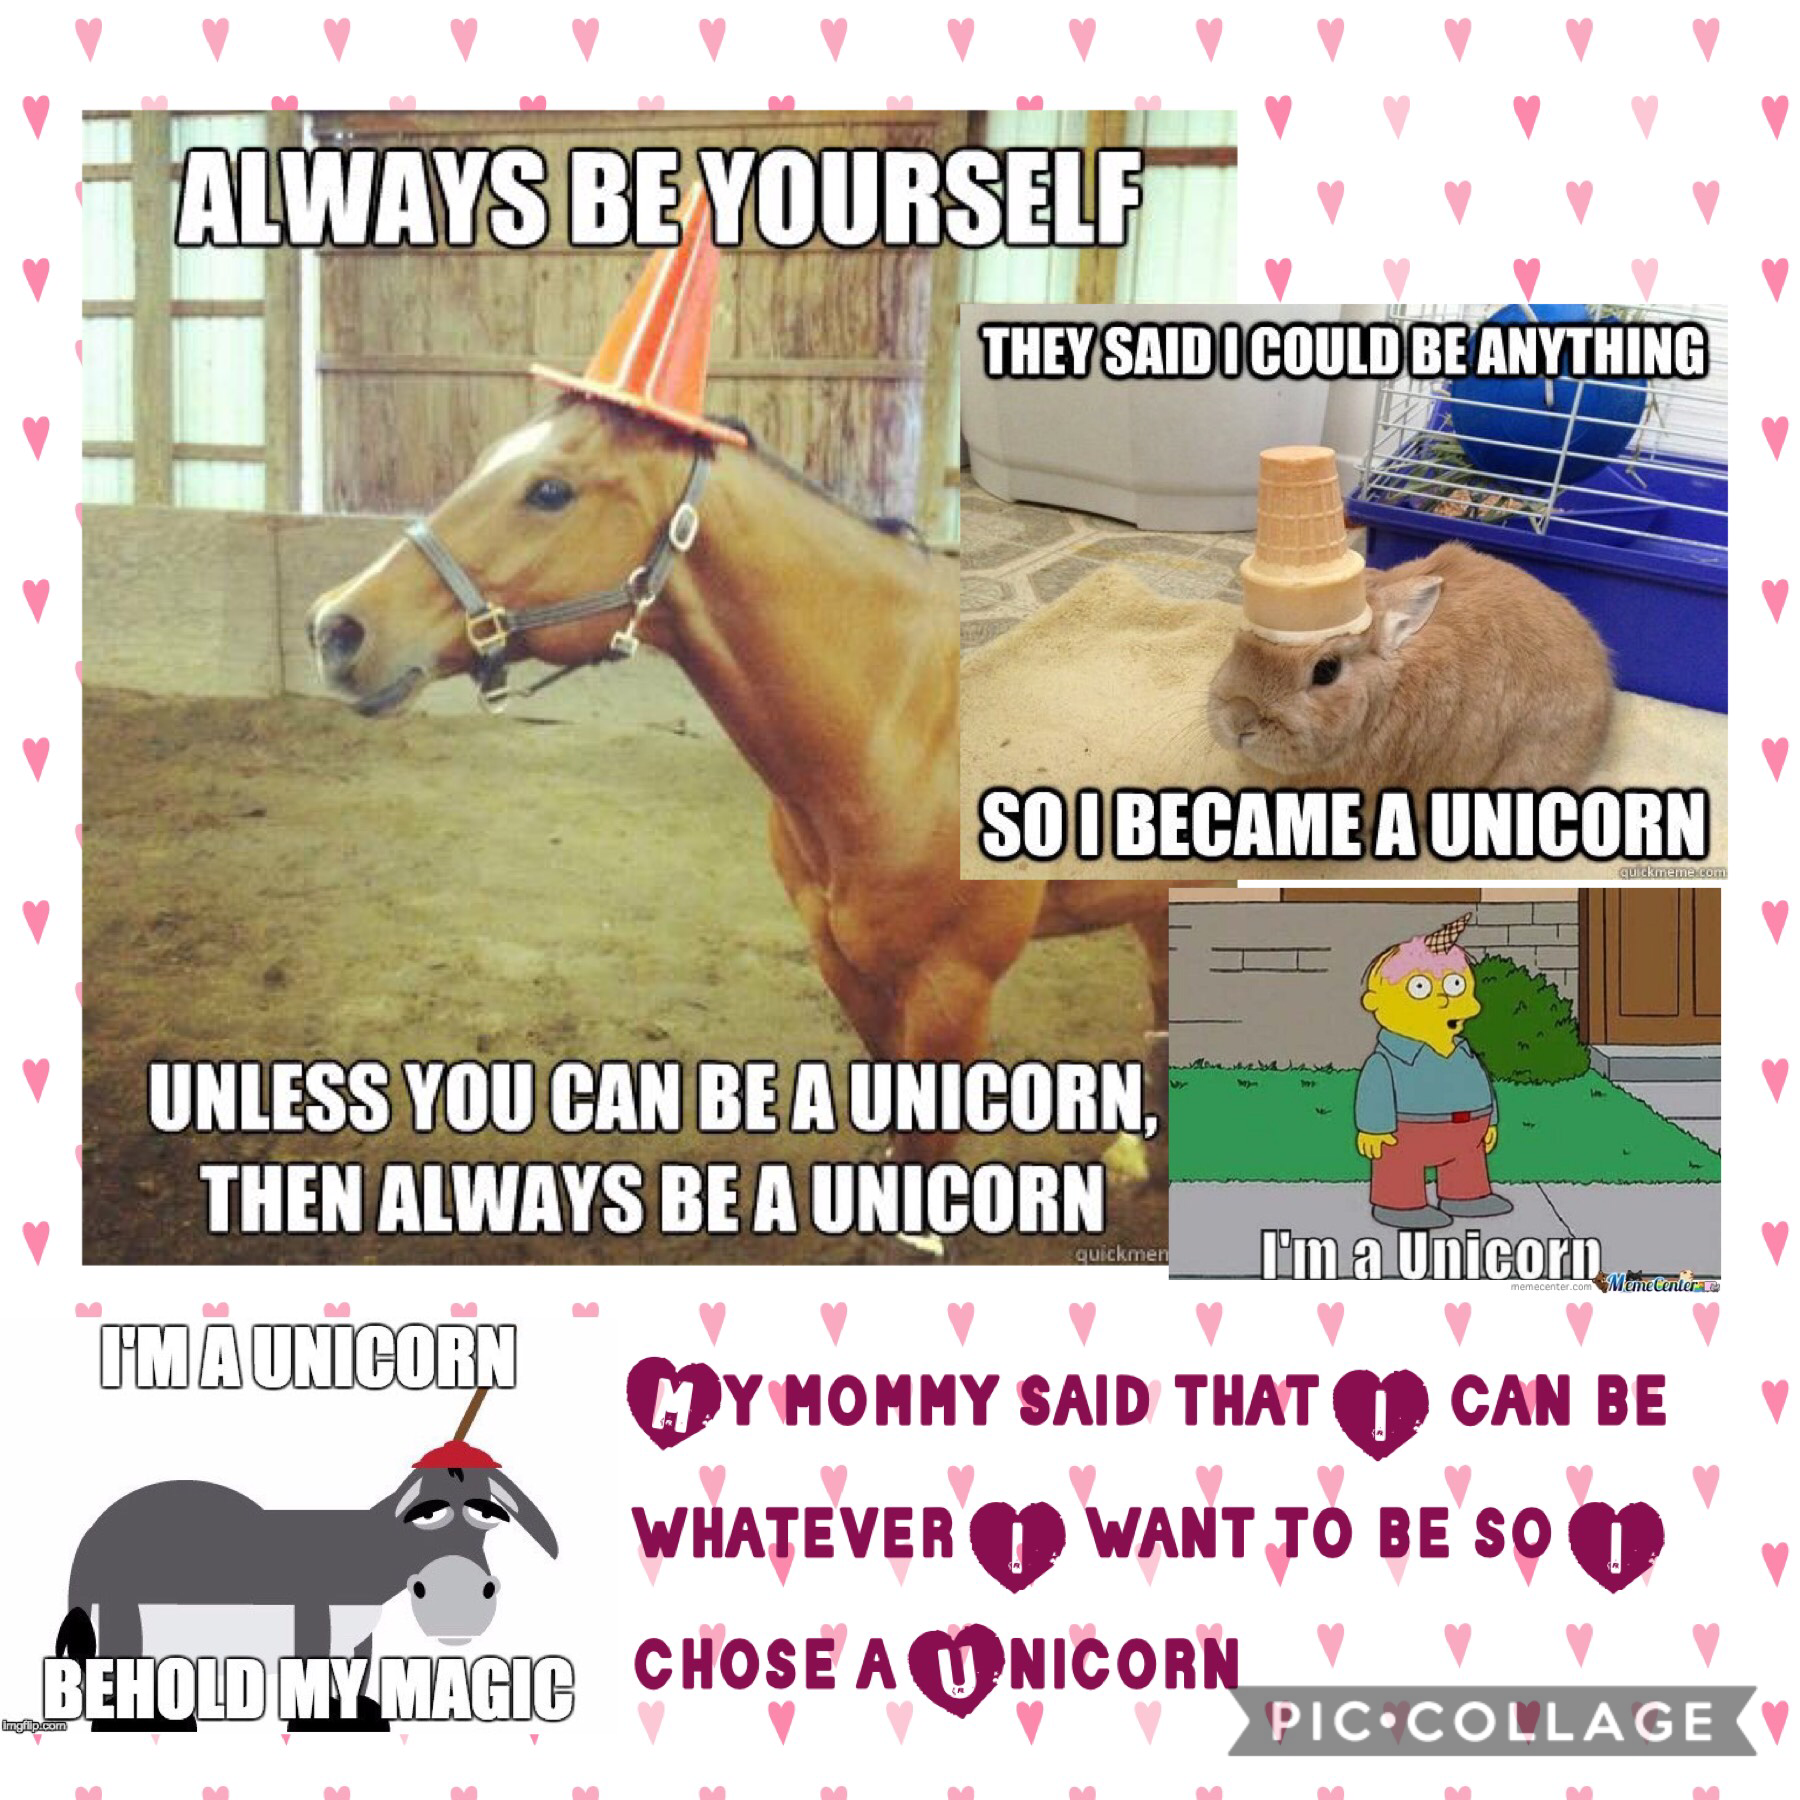 Be what you wanna be, unicorn style!